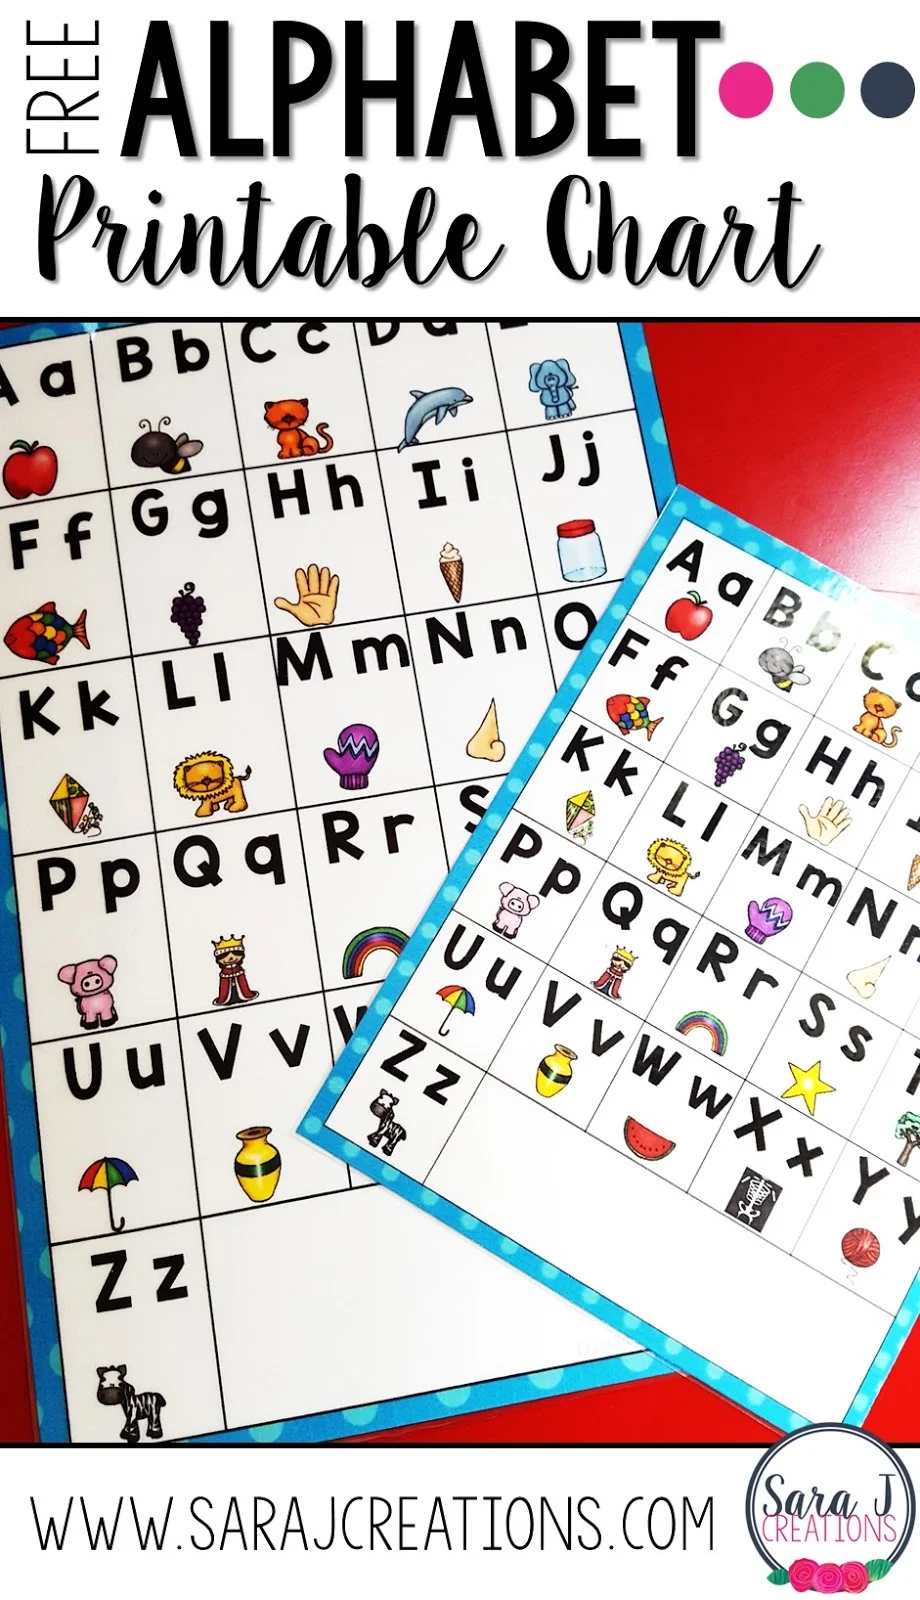 This free printable alphabet chart is perfect to help my preschooler remember the upper and lower case versions of each letter. We can also use this same chart as we move into beginning sounds.